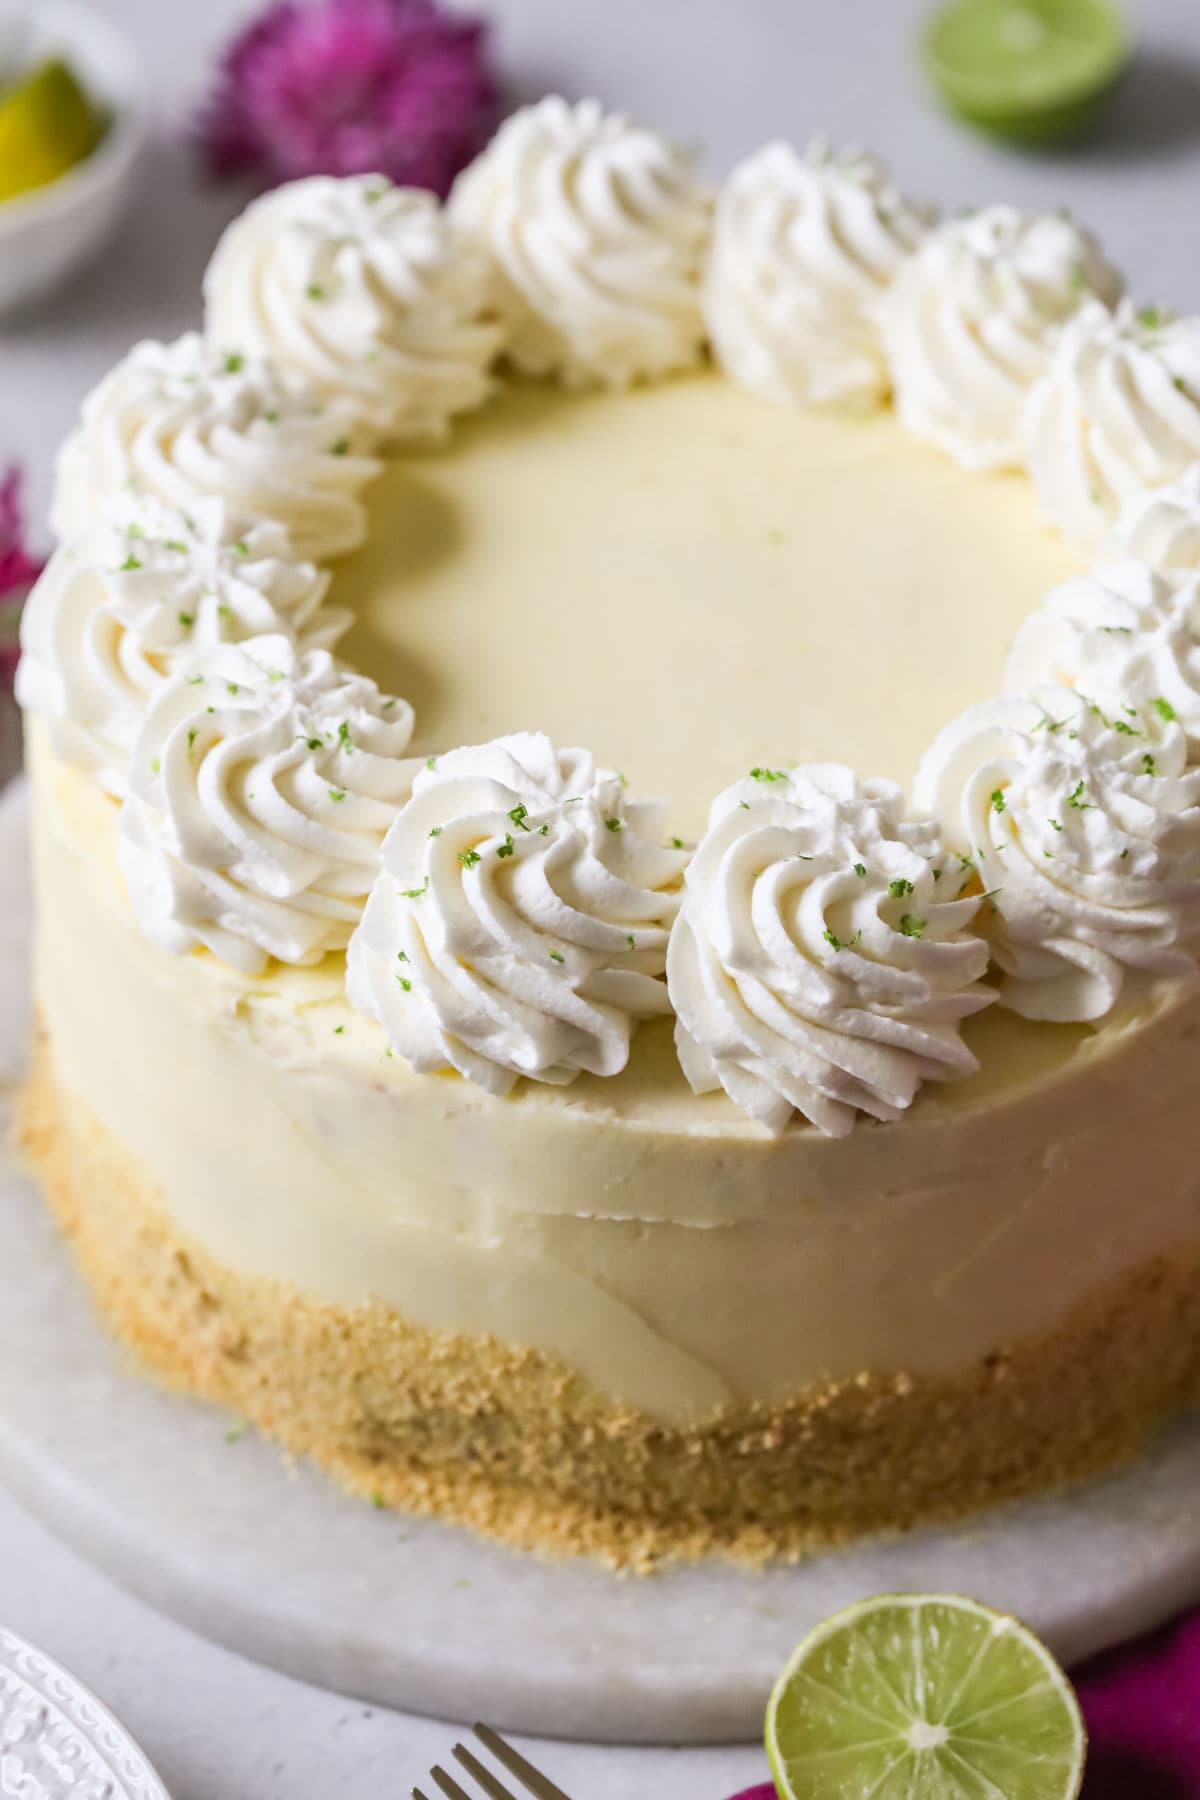 Overhead view of a cake that's been decorated with graham cracker crumbs, whipped cream swirls, and lime zest.